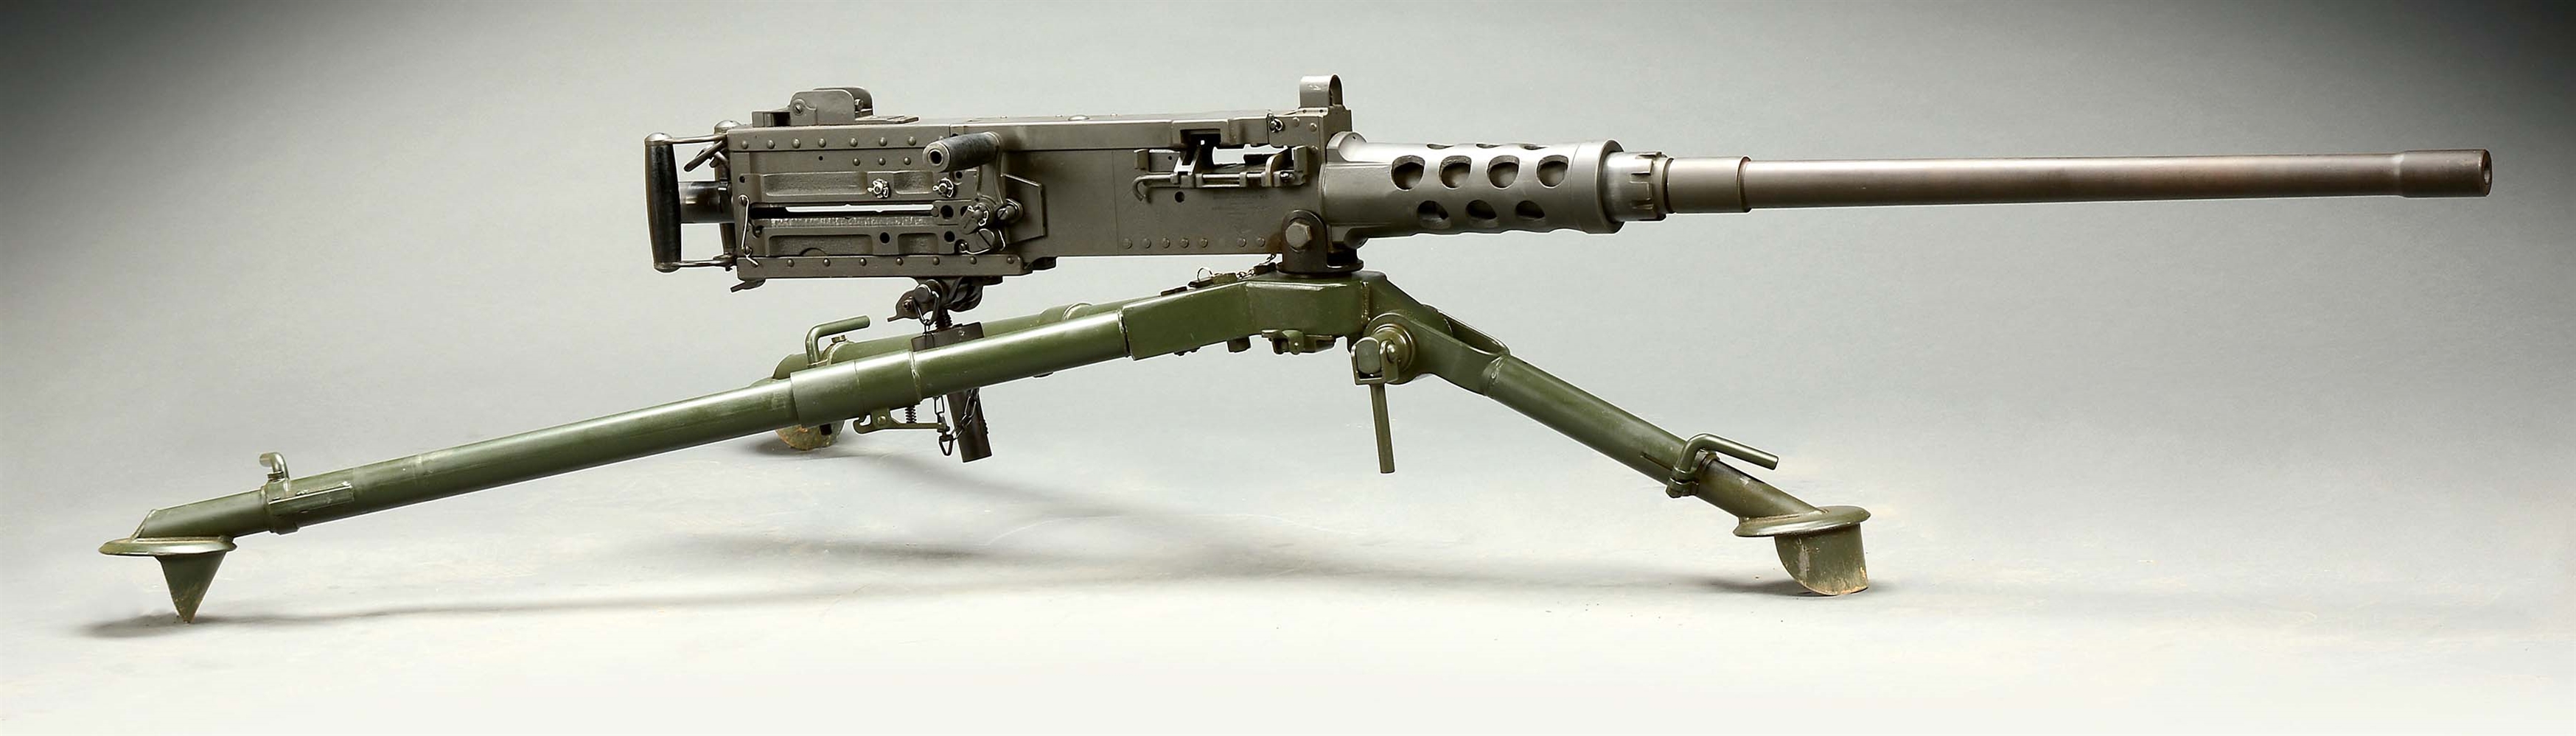 (N) HIGHLY SOUGHT RAMO SIDEPLATE BROWNING M2 .50 CAL MACHINE GUN (FULLY TRANSFERABLE)